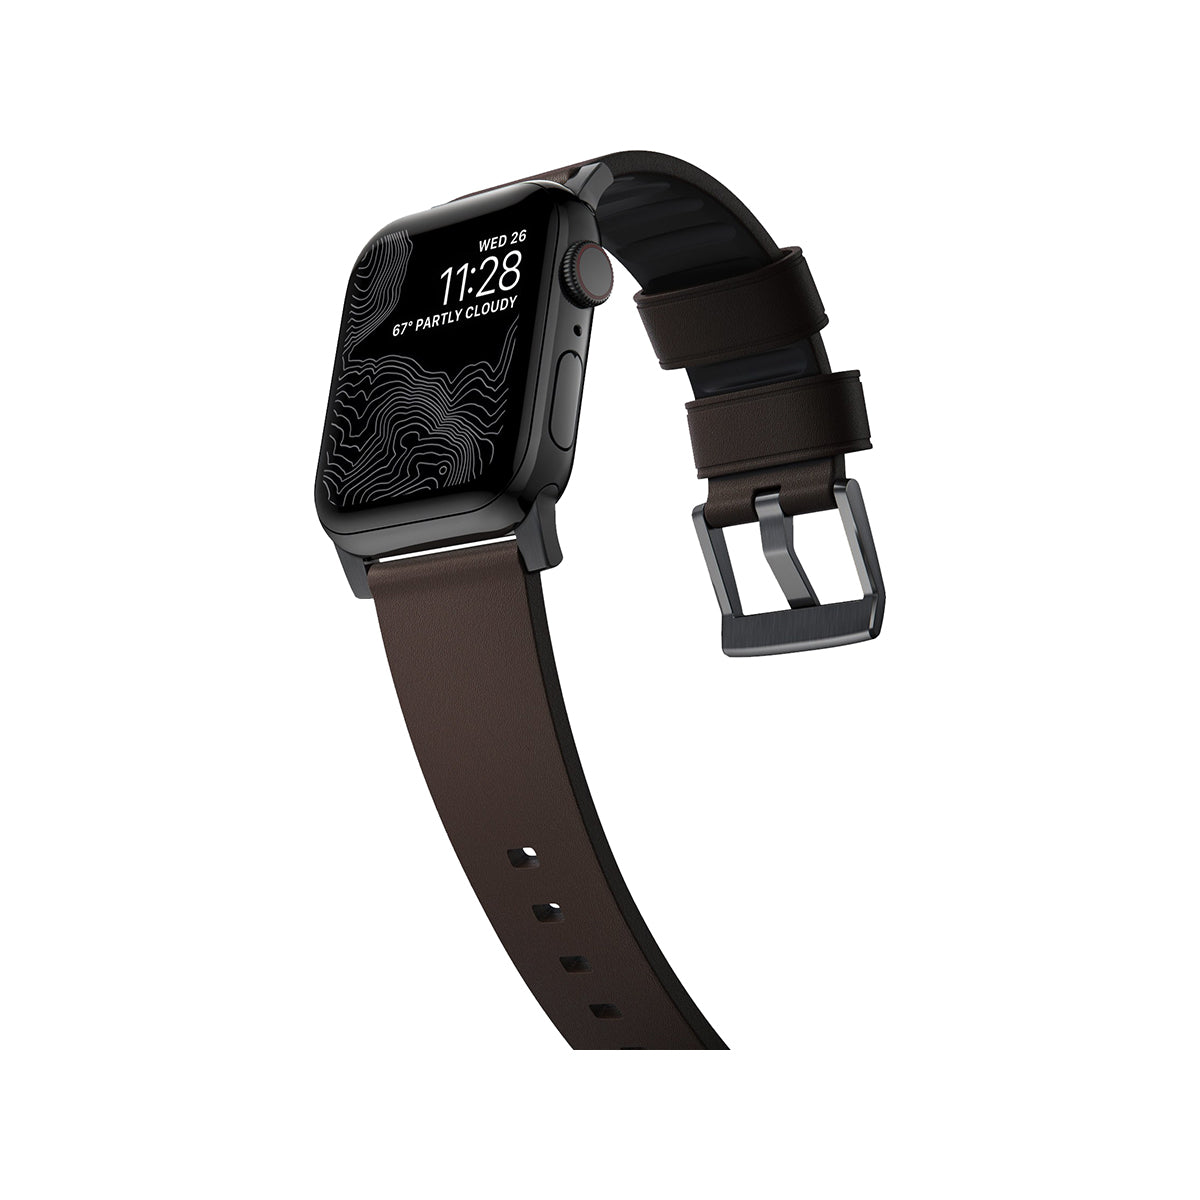 Nomad Apple Watch 41mm Active Band Pro - Black Hardware with Brown Leather Strap.